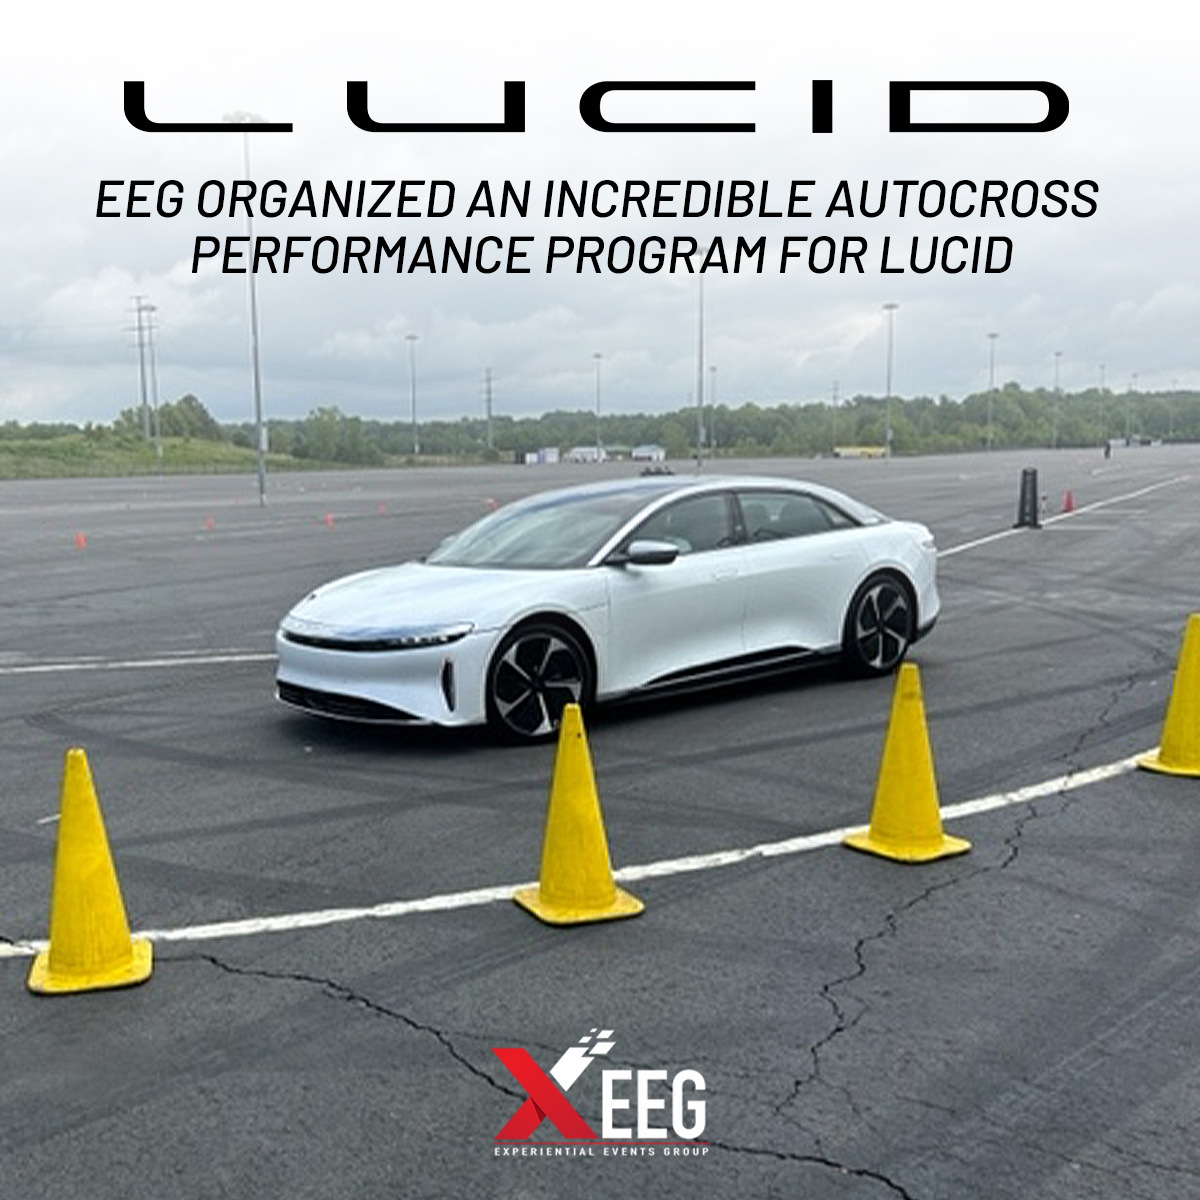 Get ready for a thrilling ride! EEG organized an incredible autocross performance program for @LucidMotors  where consumers experienced the ultimate driving experience on a closed course. 
.
#mobilemarketing #eventlogistics #eeg #experientialevents